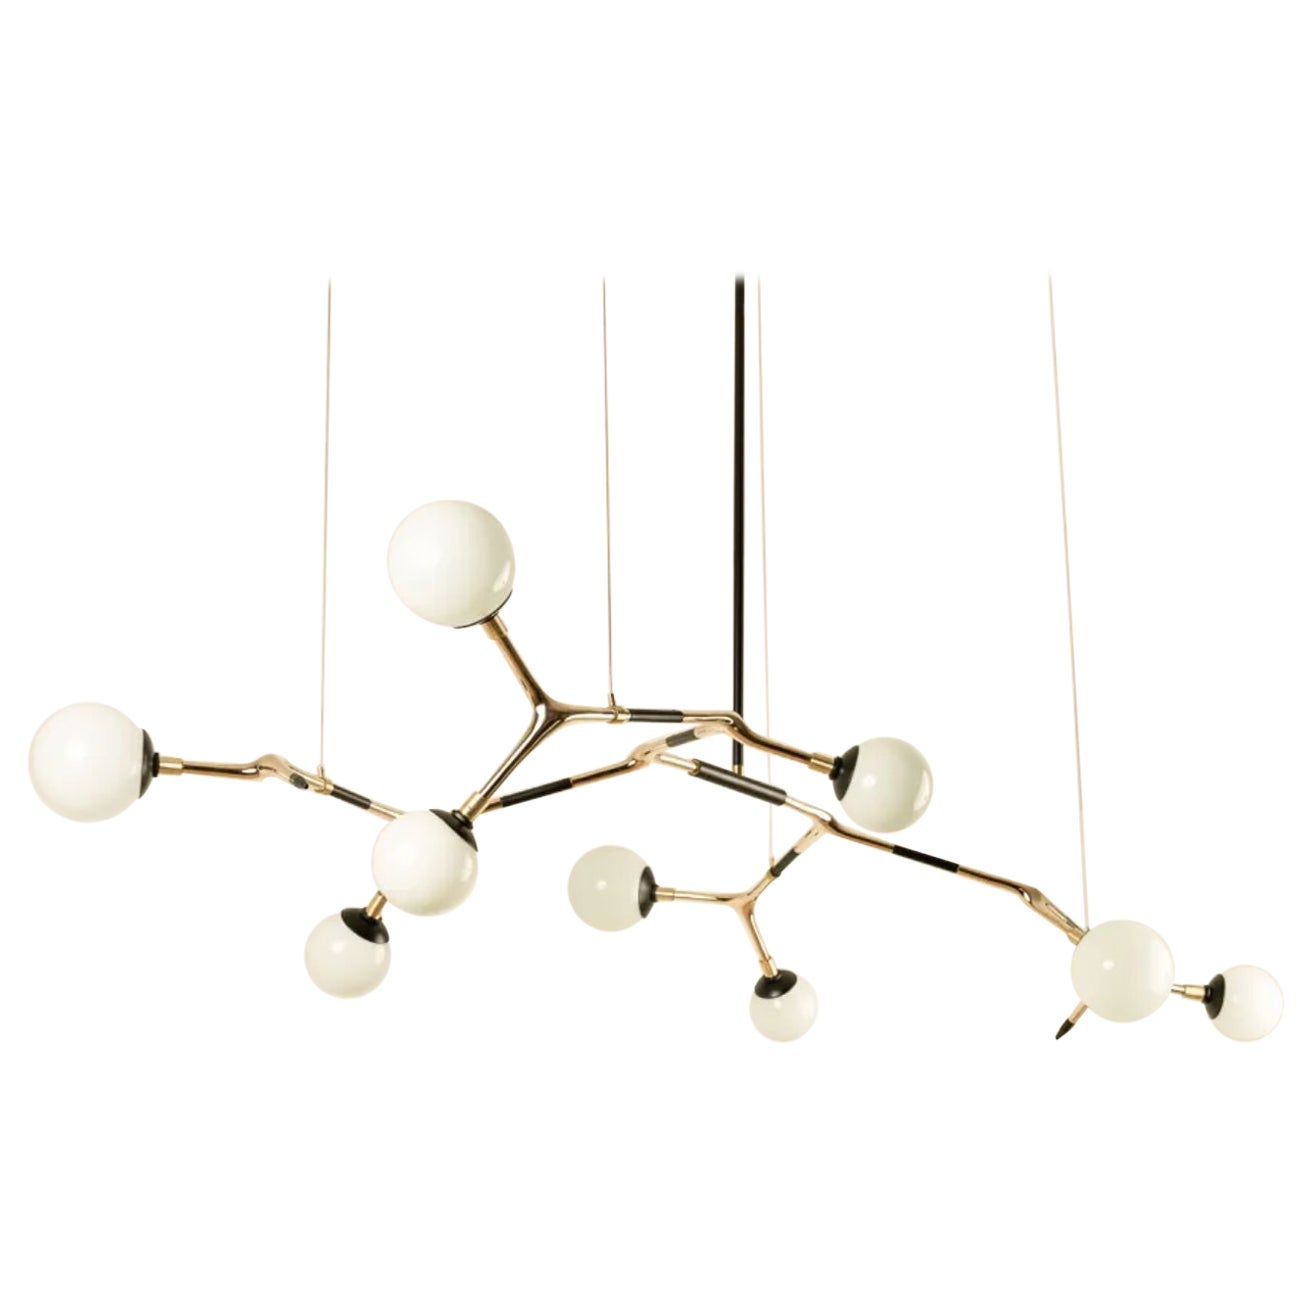 White and Polished Bronze Mantis 9 Pendant Lamp by Isabel Moncada